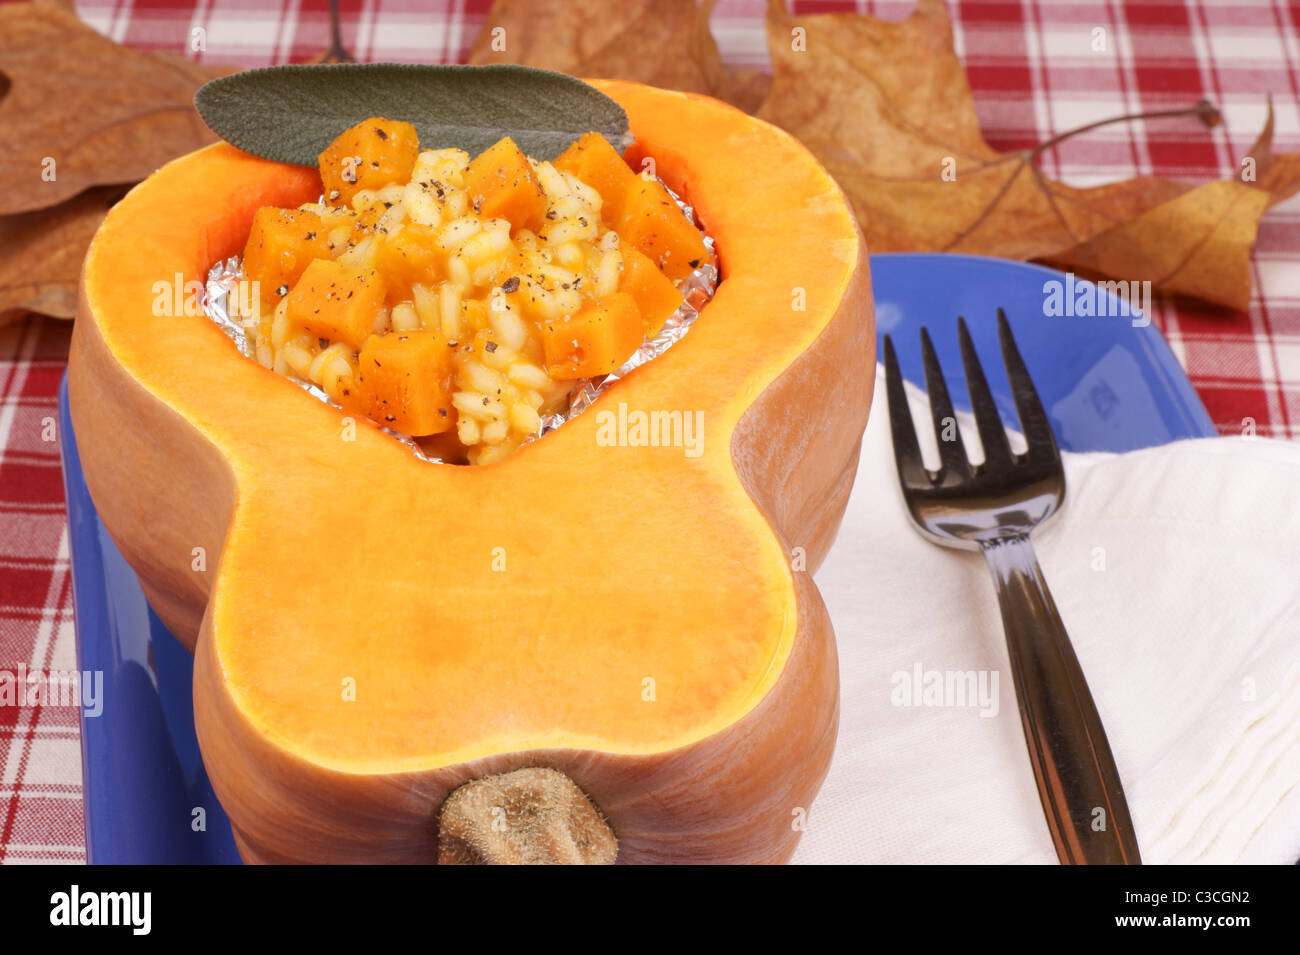 Half pumpkin filled with pumpkin risotto served on a blue plate Stock Photo